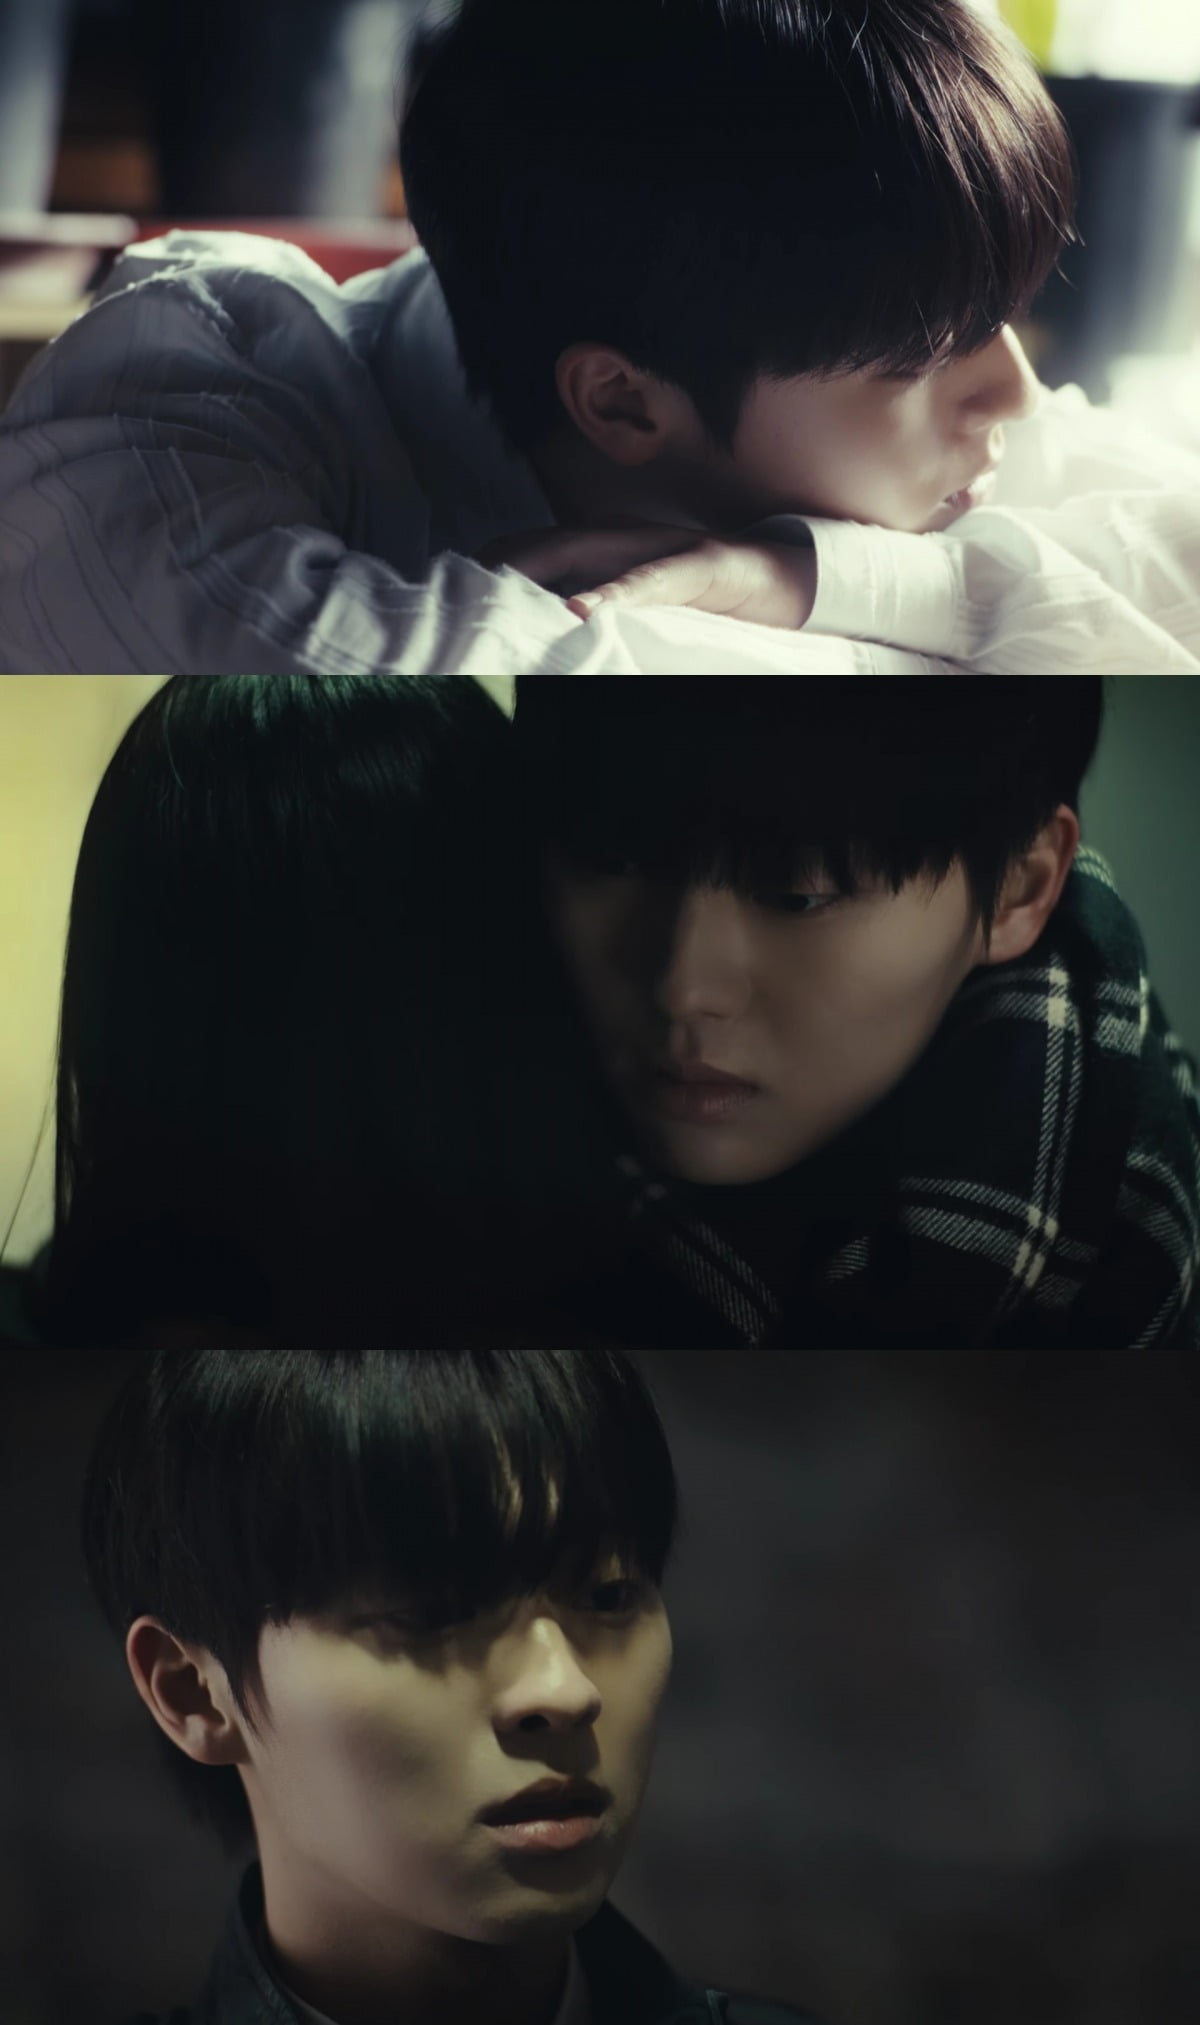 Choi Hyun-wook, Lee Hi and Sung Si-kyung appear in ‘Alleyway’ MV following New Jeans Ditto